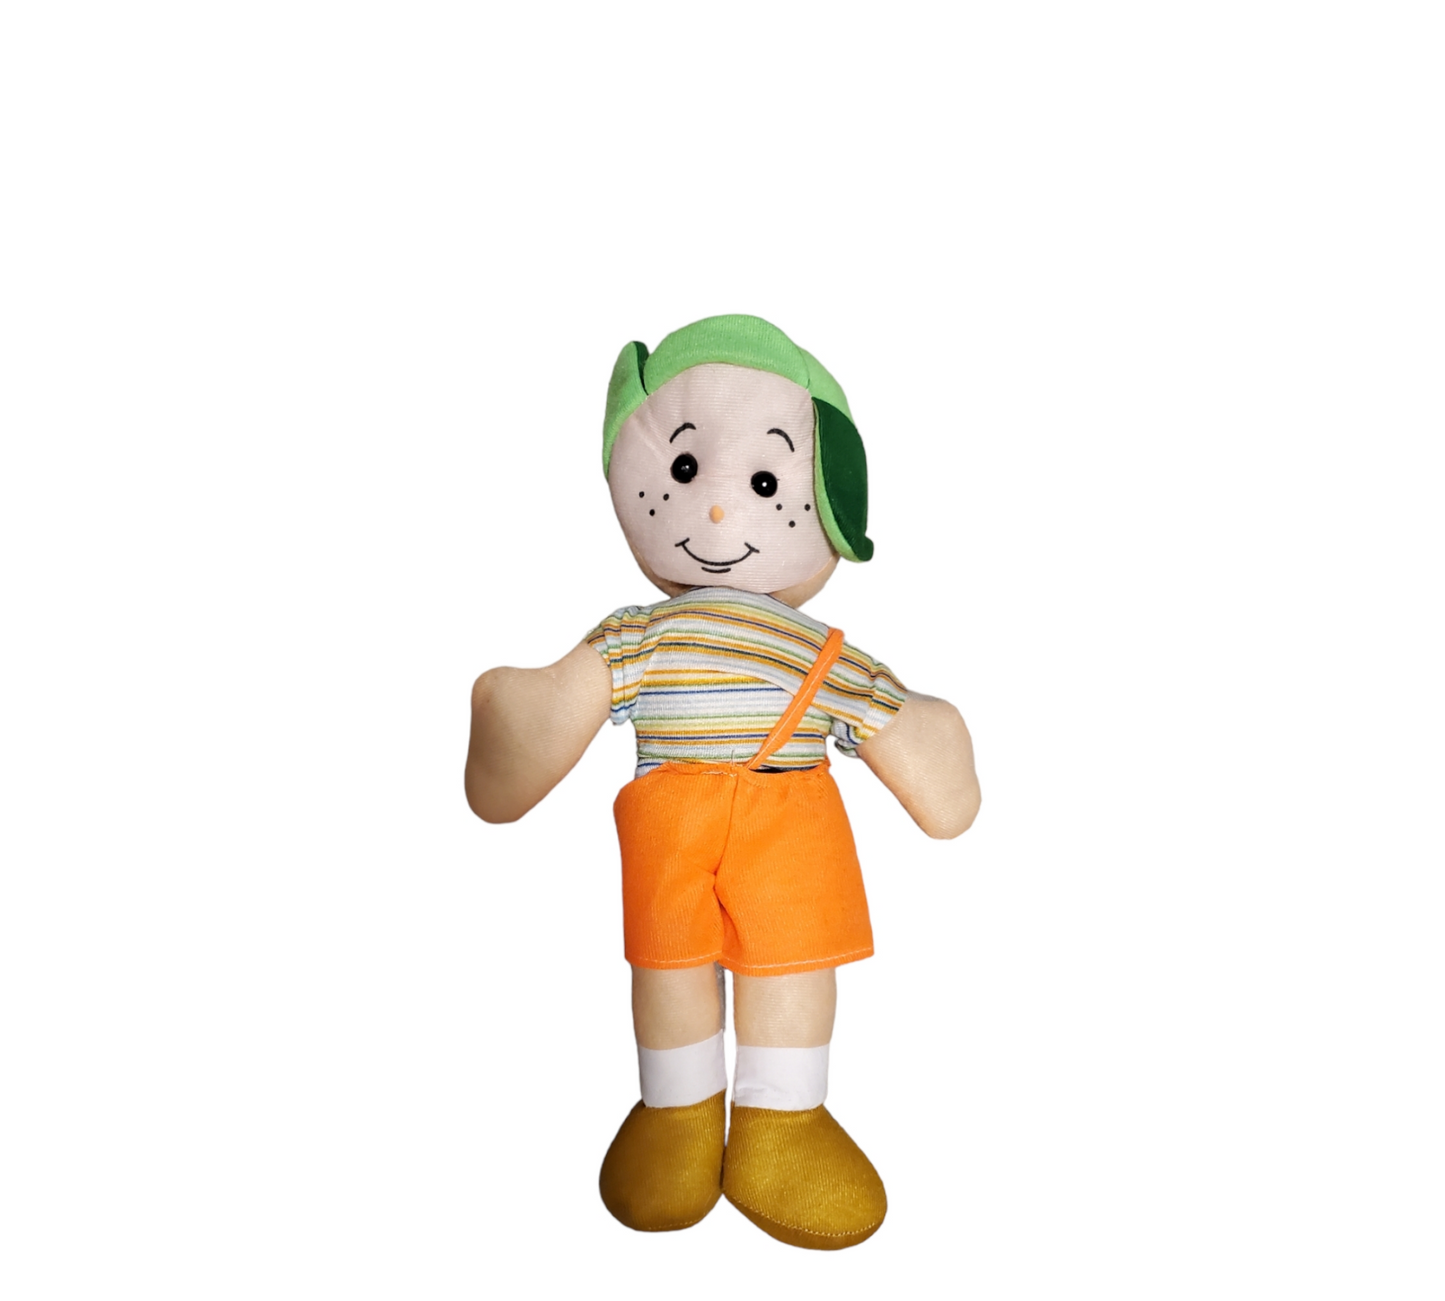 Cupid Beauty Supplies Cupid Beauty Supplies Plush Toys El Chavo Del 8 Plush Toy, Color Varies